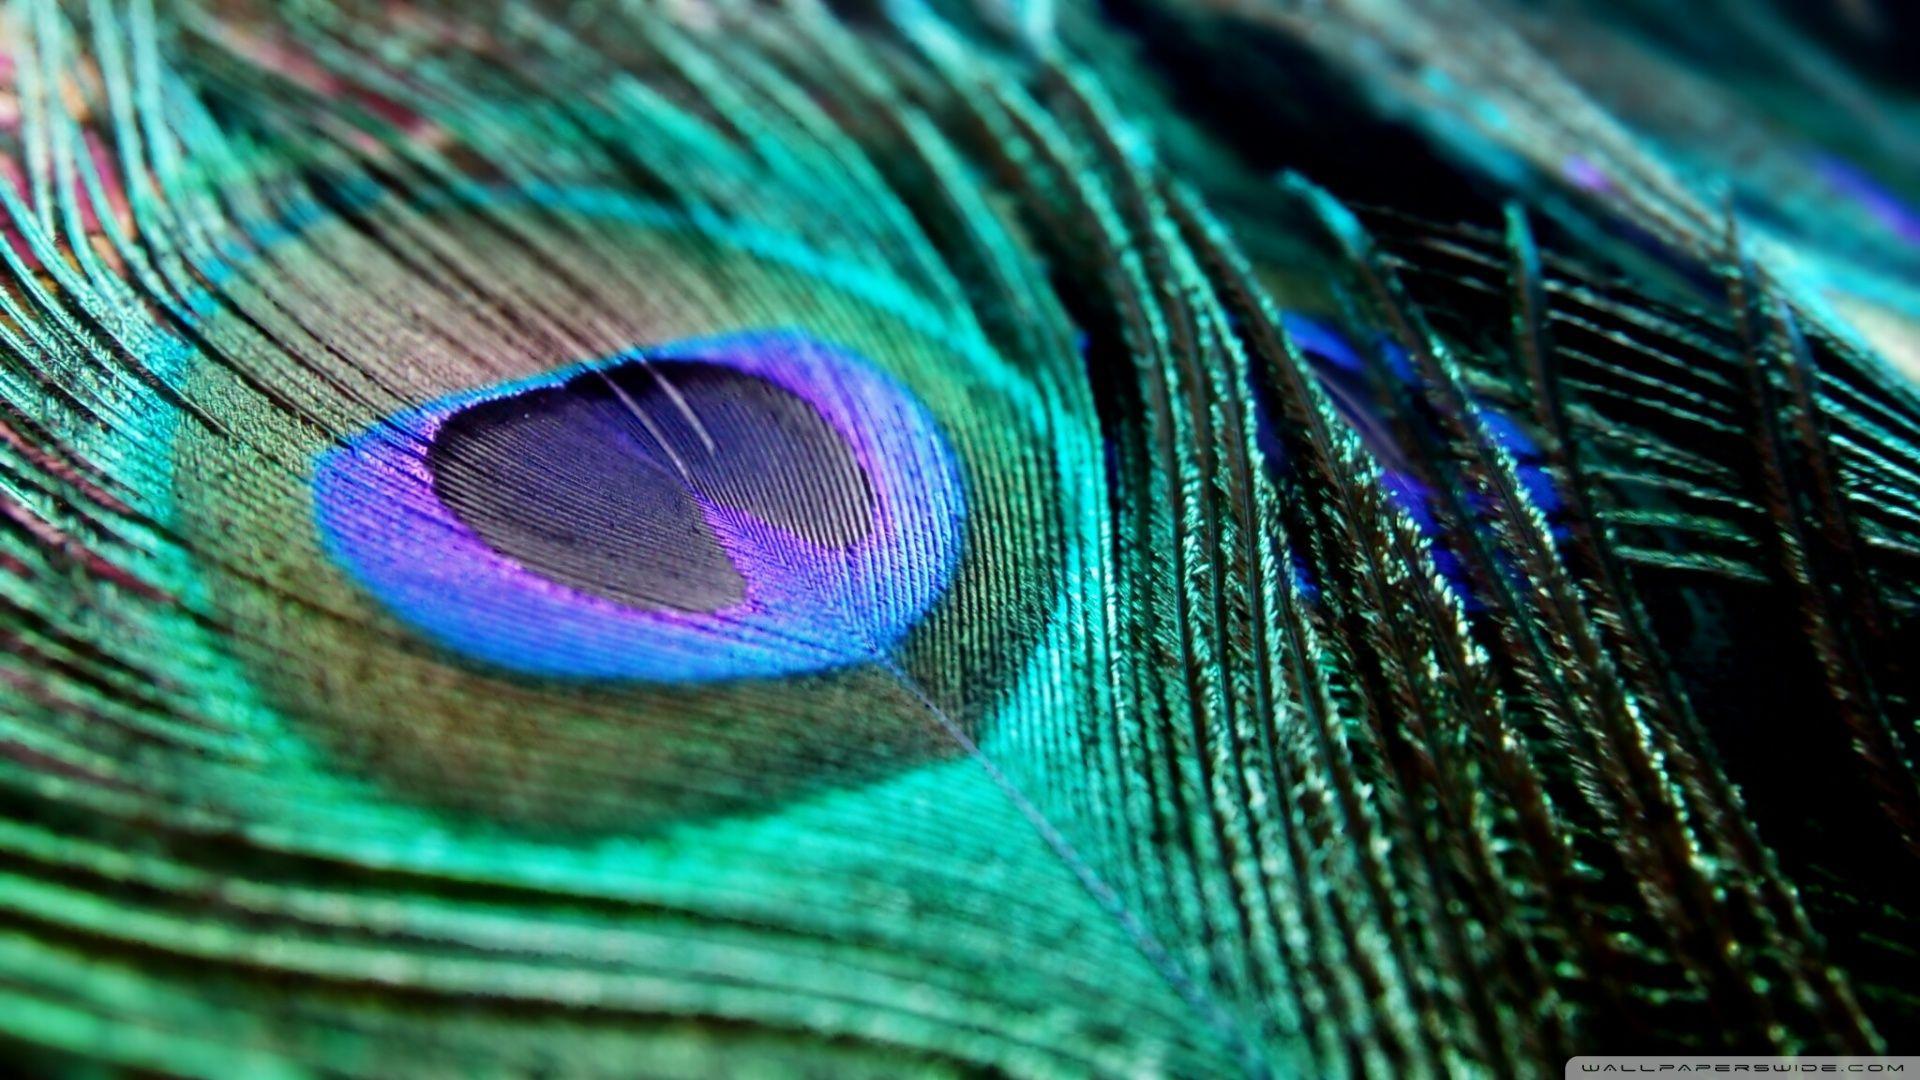 Peacock Feather wallpapers – wallpapers free download